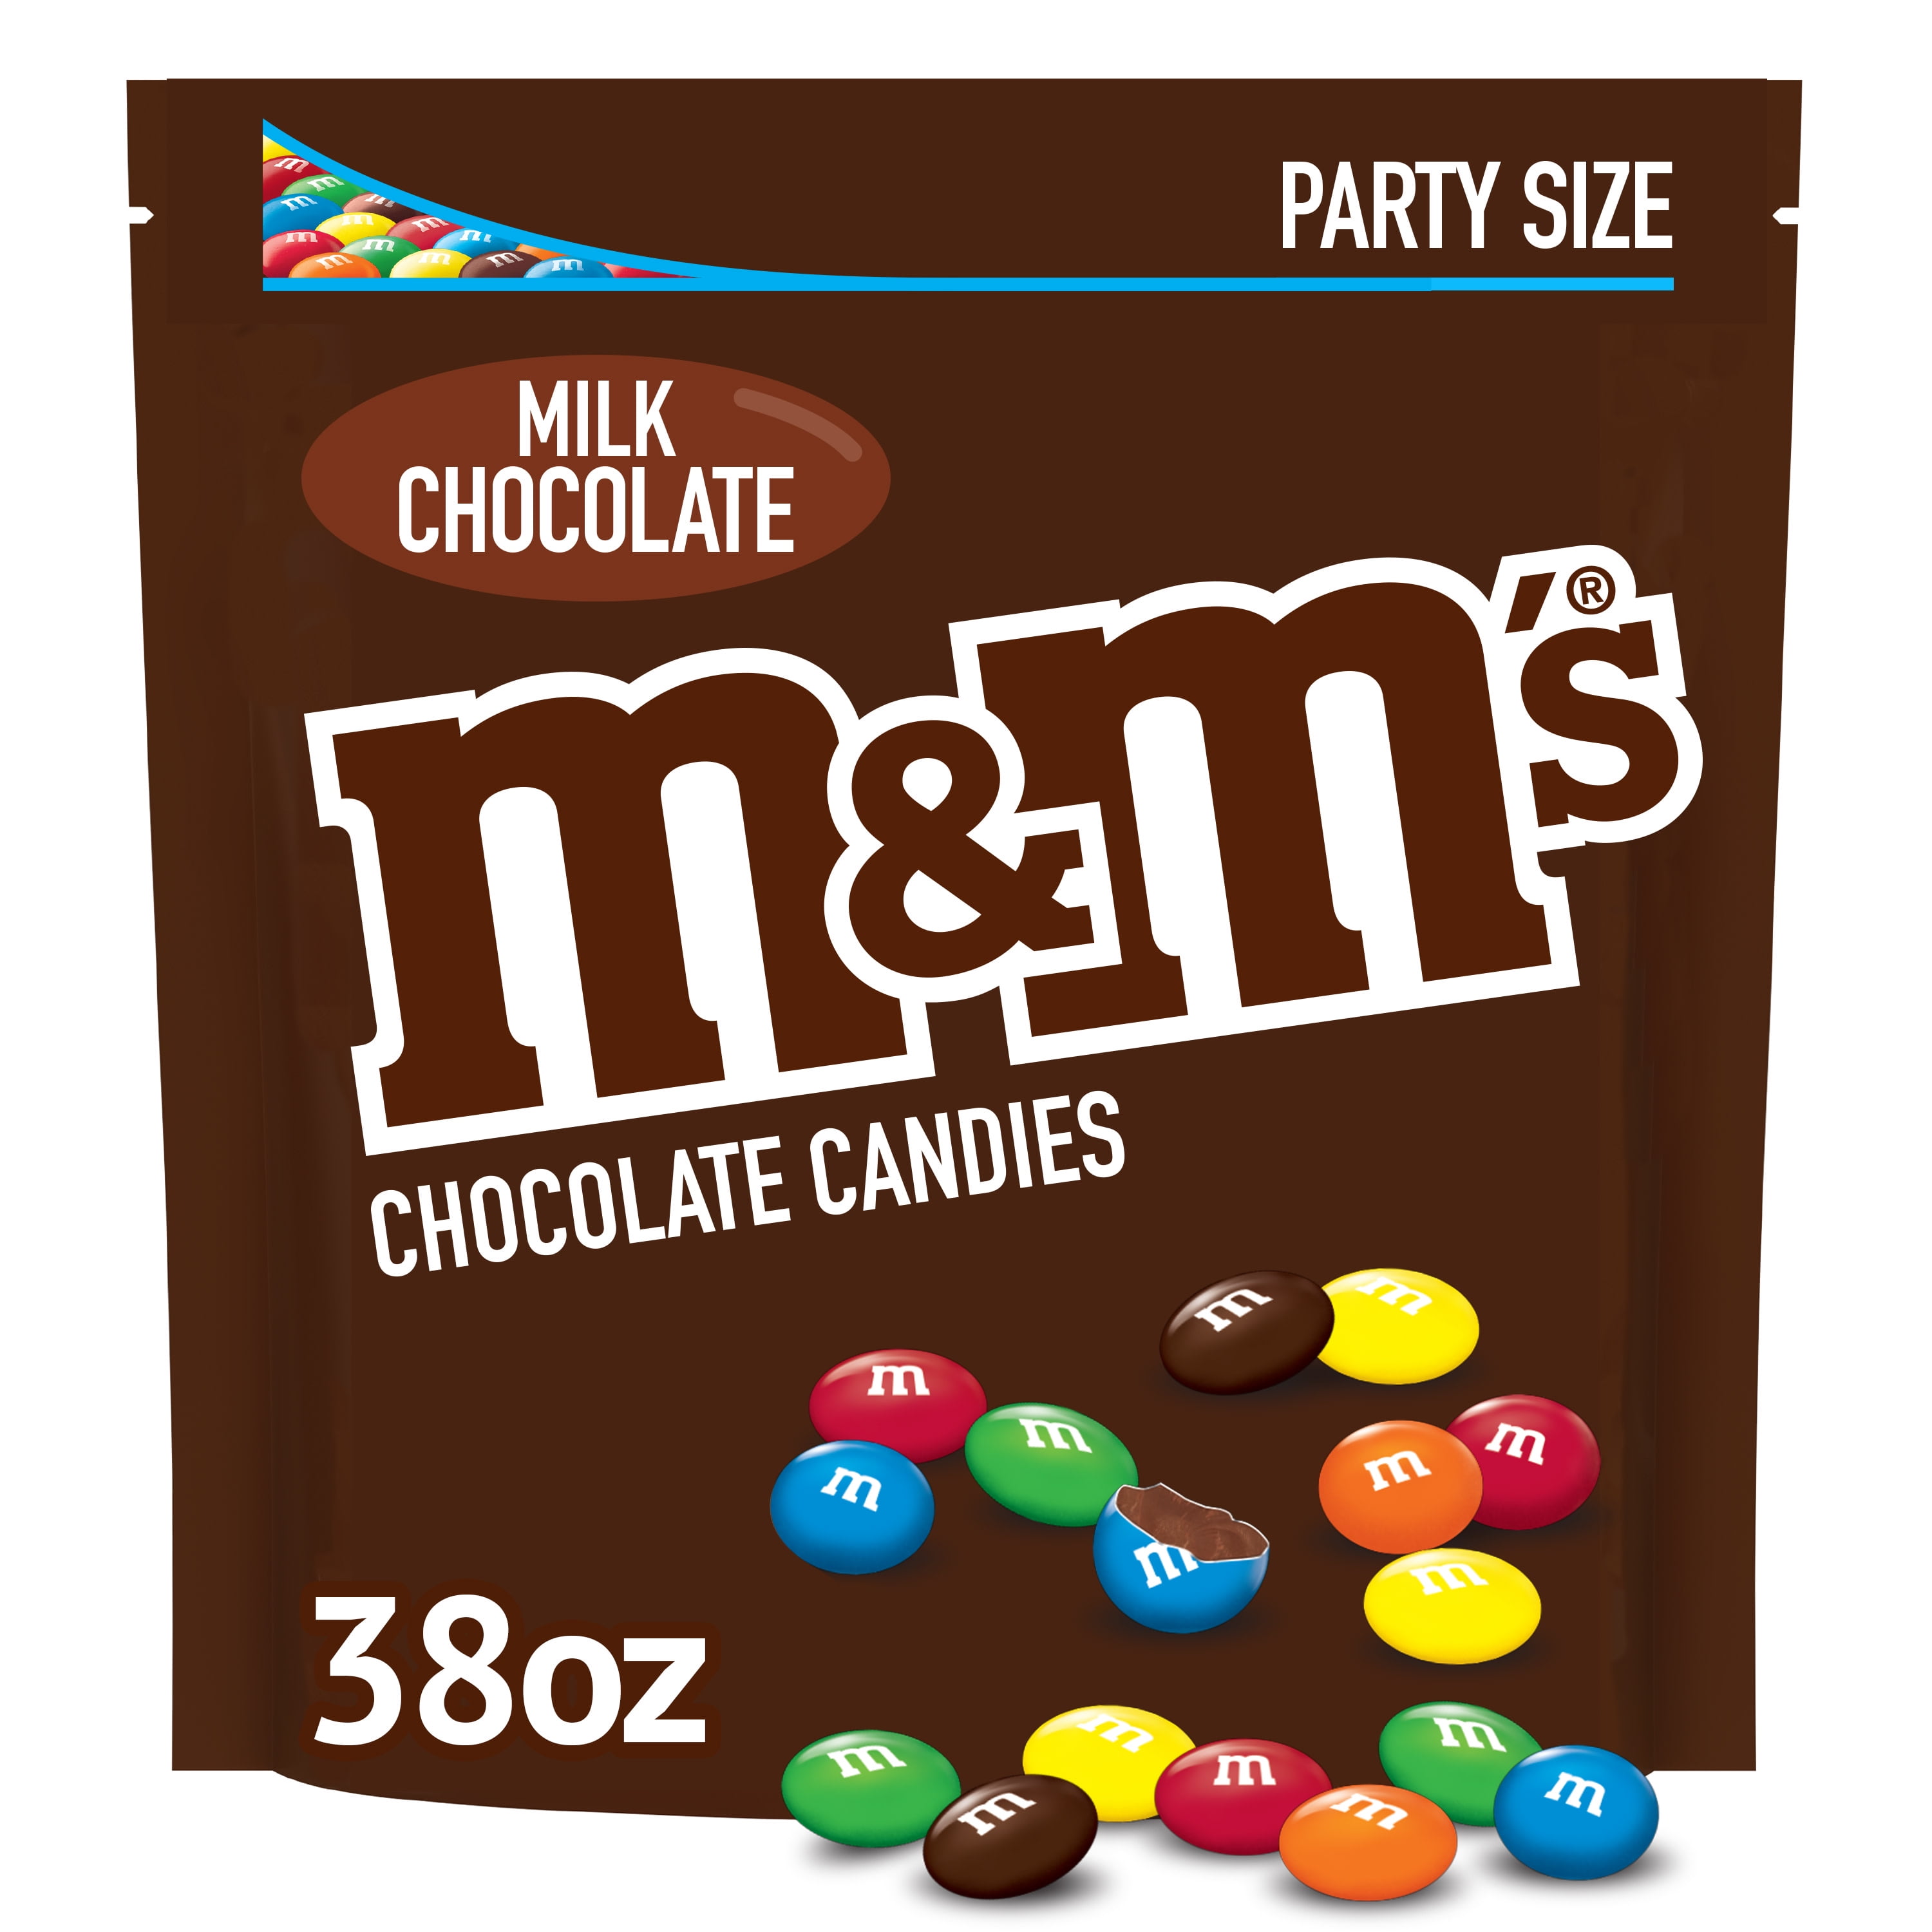 M&M's Milk Chocolate Candy, Party Size - 38 oz Bag